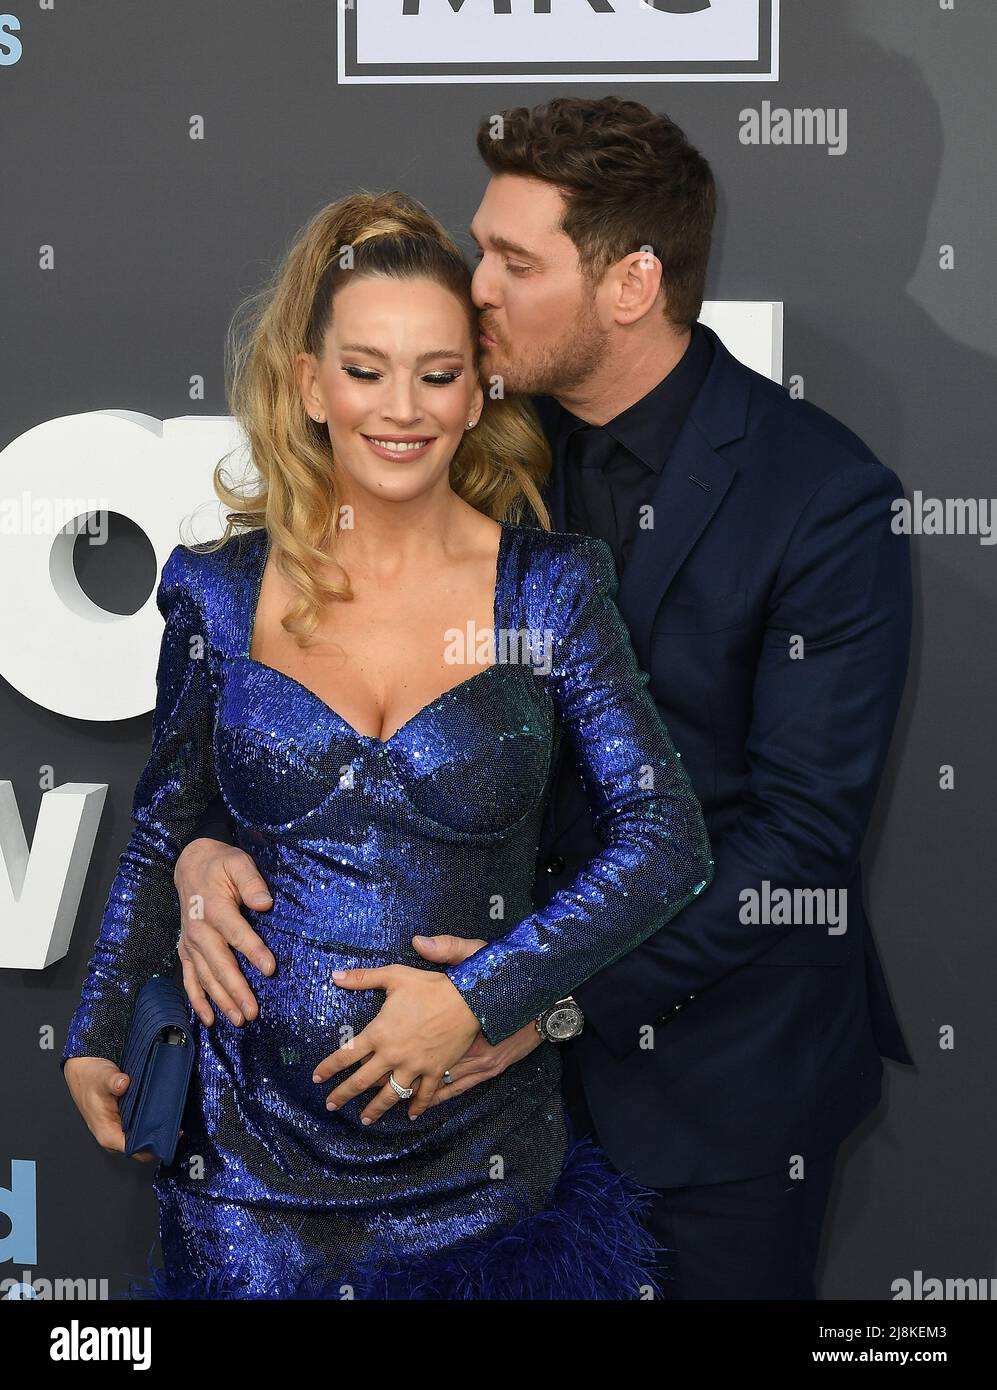 Las Vegas, USA. 15th May, 2022. Michael Buble and Luisana Lopilato attends the 2022 Billboard Music Awards at MGM Grand Garden Arena on May 15, 2022 in Las Vegas, Nevada. Photo: Casey Flanigan/imageSPACE Credit: Imagespace/Alamy Live News Stock Photo